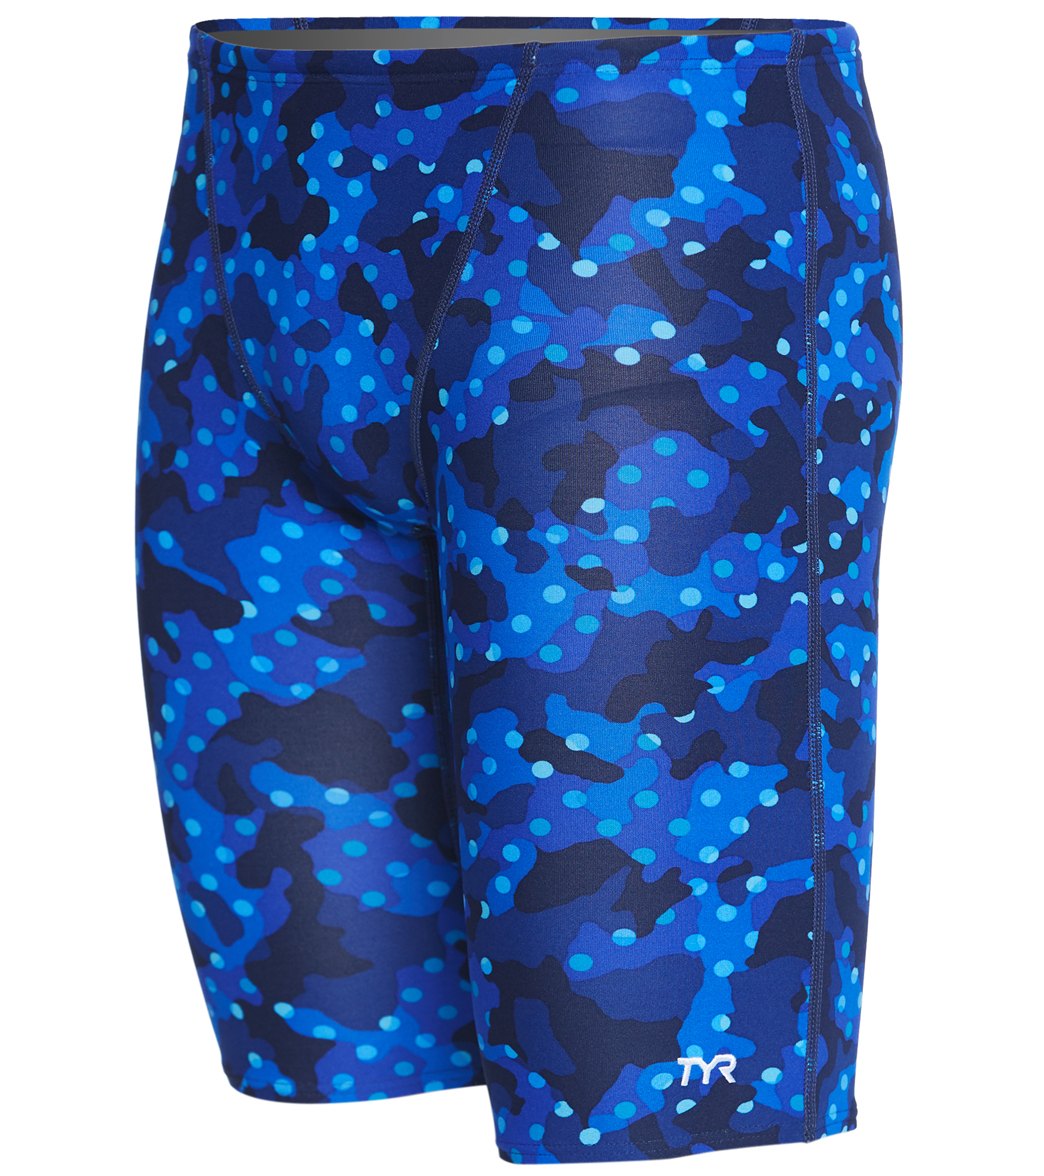 TYR Men's Cadet All Over Jammer Swimsuit at SwimOutlet.com - Free Shipping